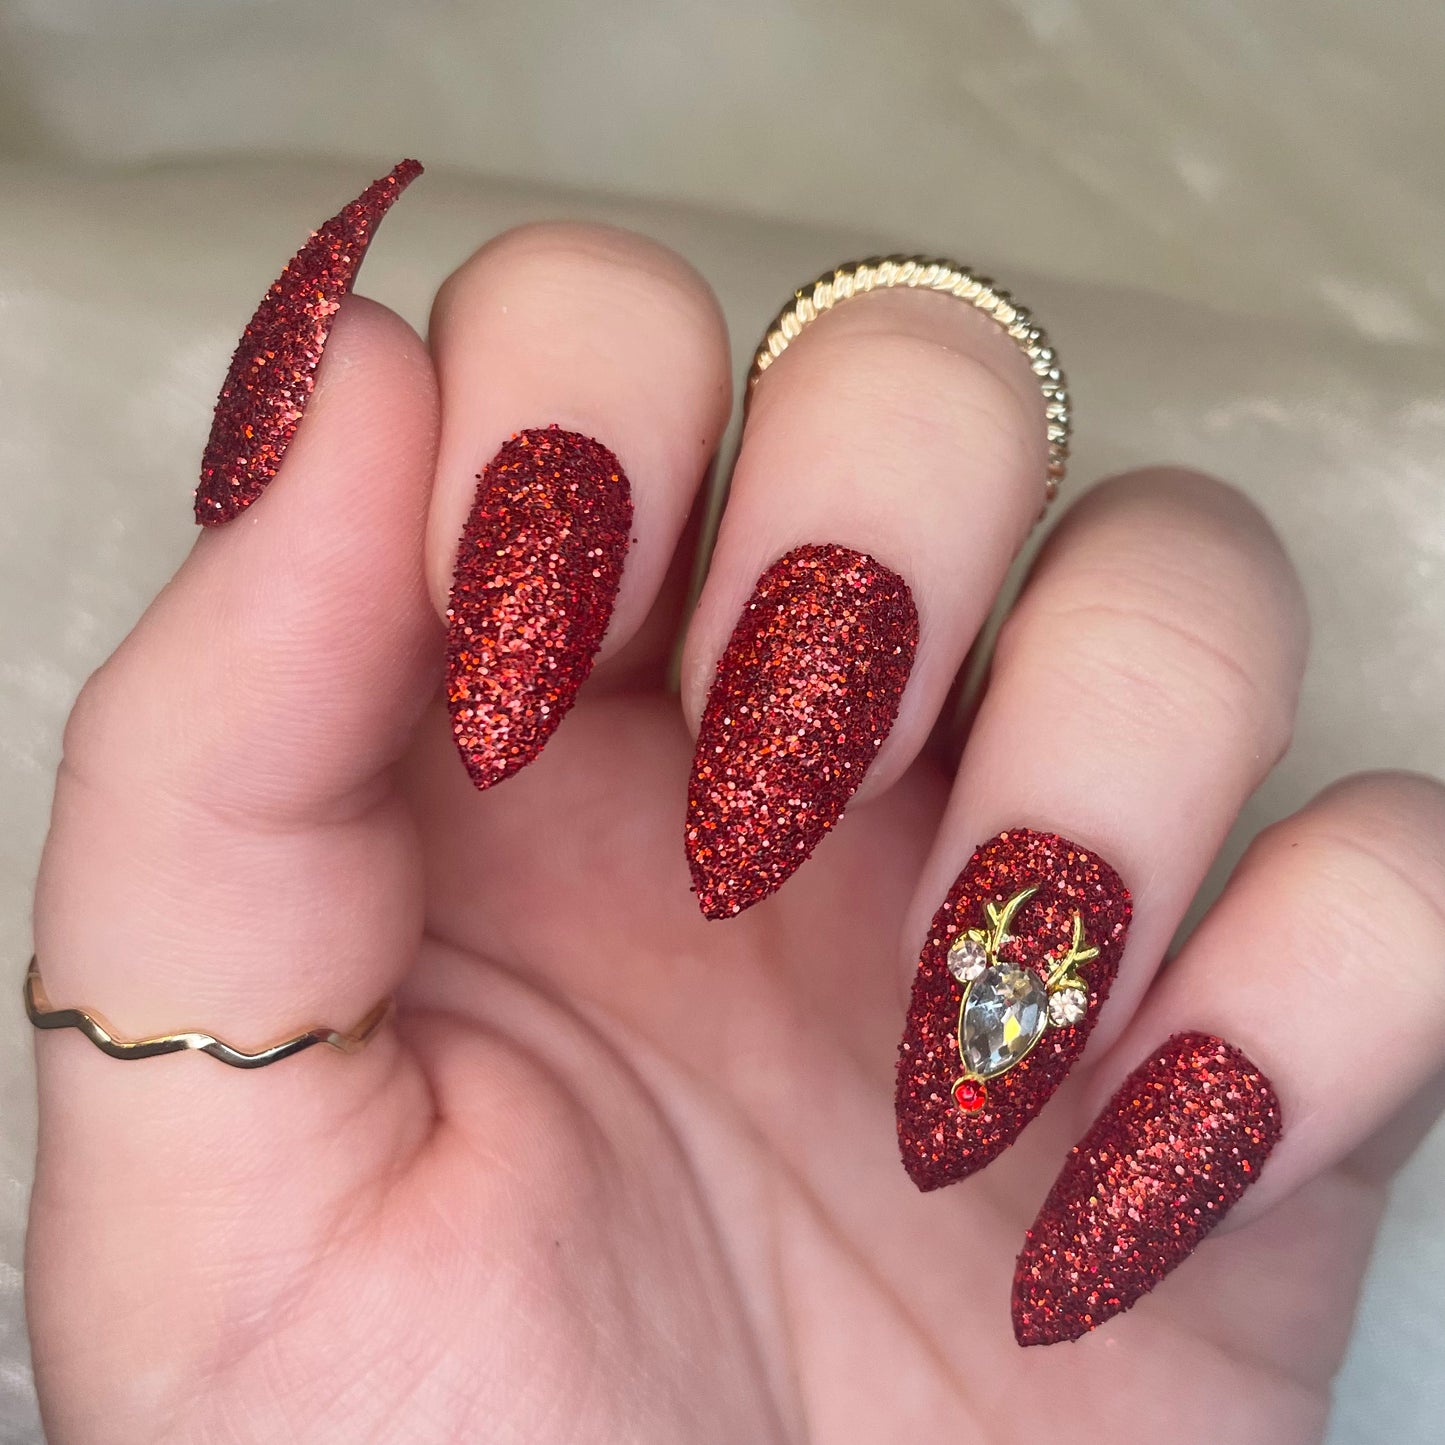 Red Glitter Stiletto Nails with Reindeer Charm